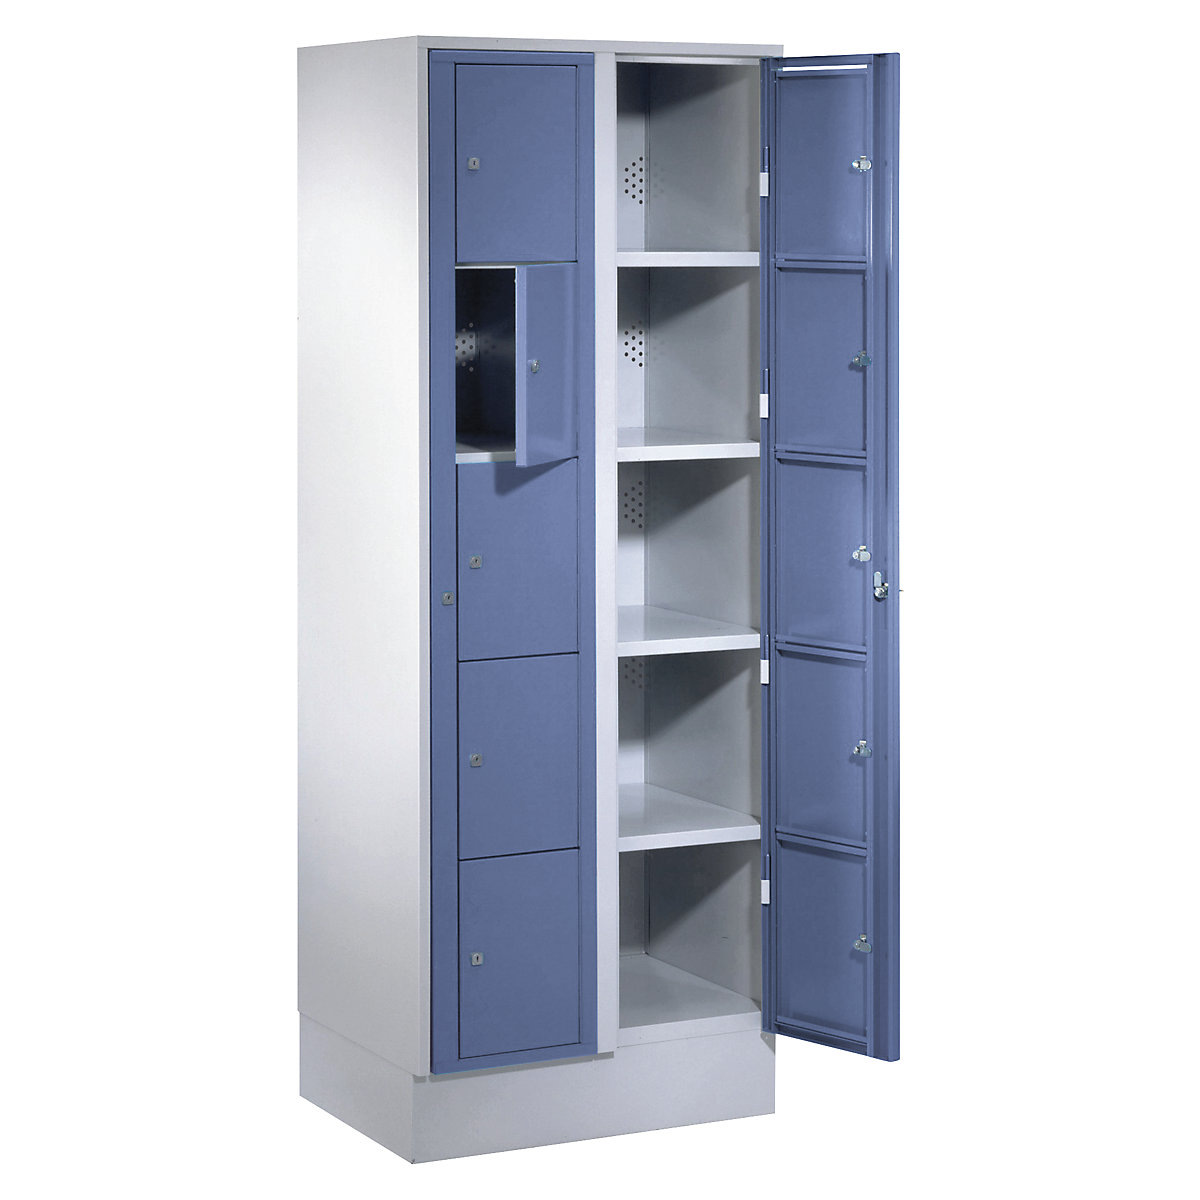 Laundry cabinet – Wolf, HxWxD 1800 x 700 x 500 mm, 10 compartments, light grey / pigeon blue-9